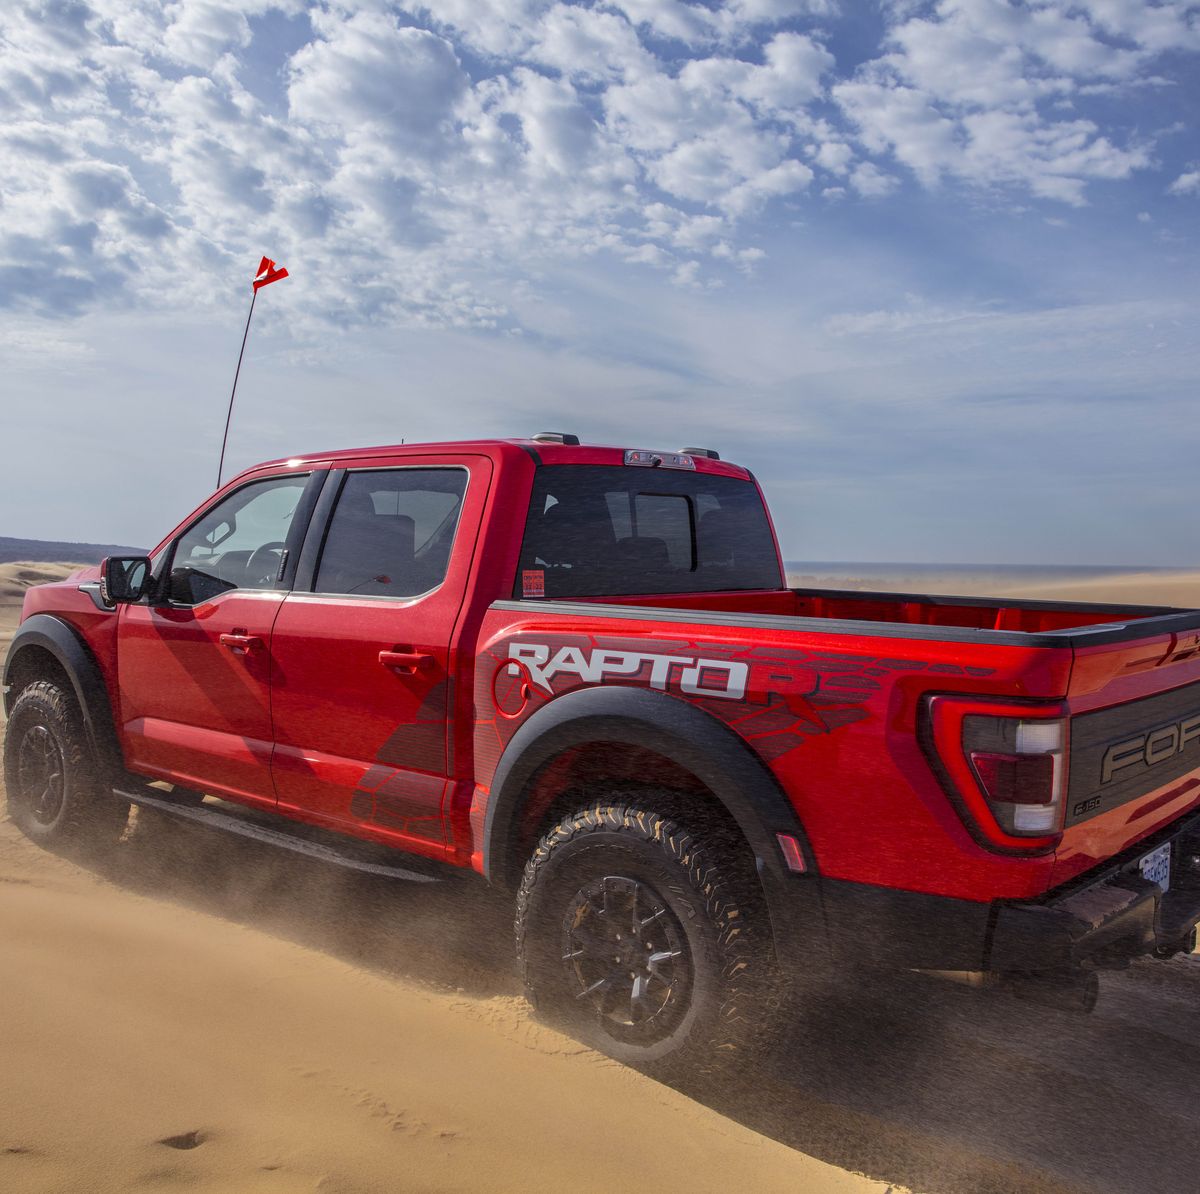 What makes Ford's new F-150 Raptor pickup truck special isn't